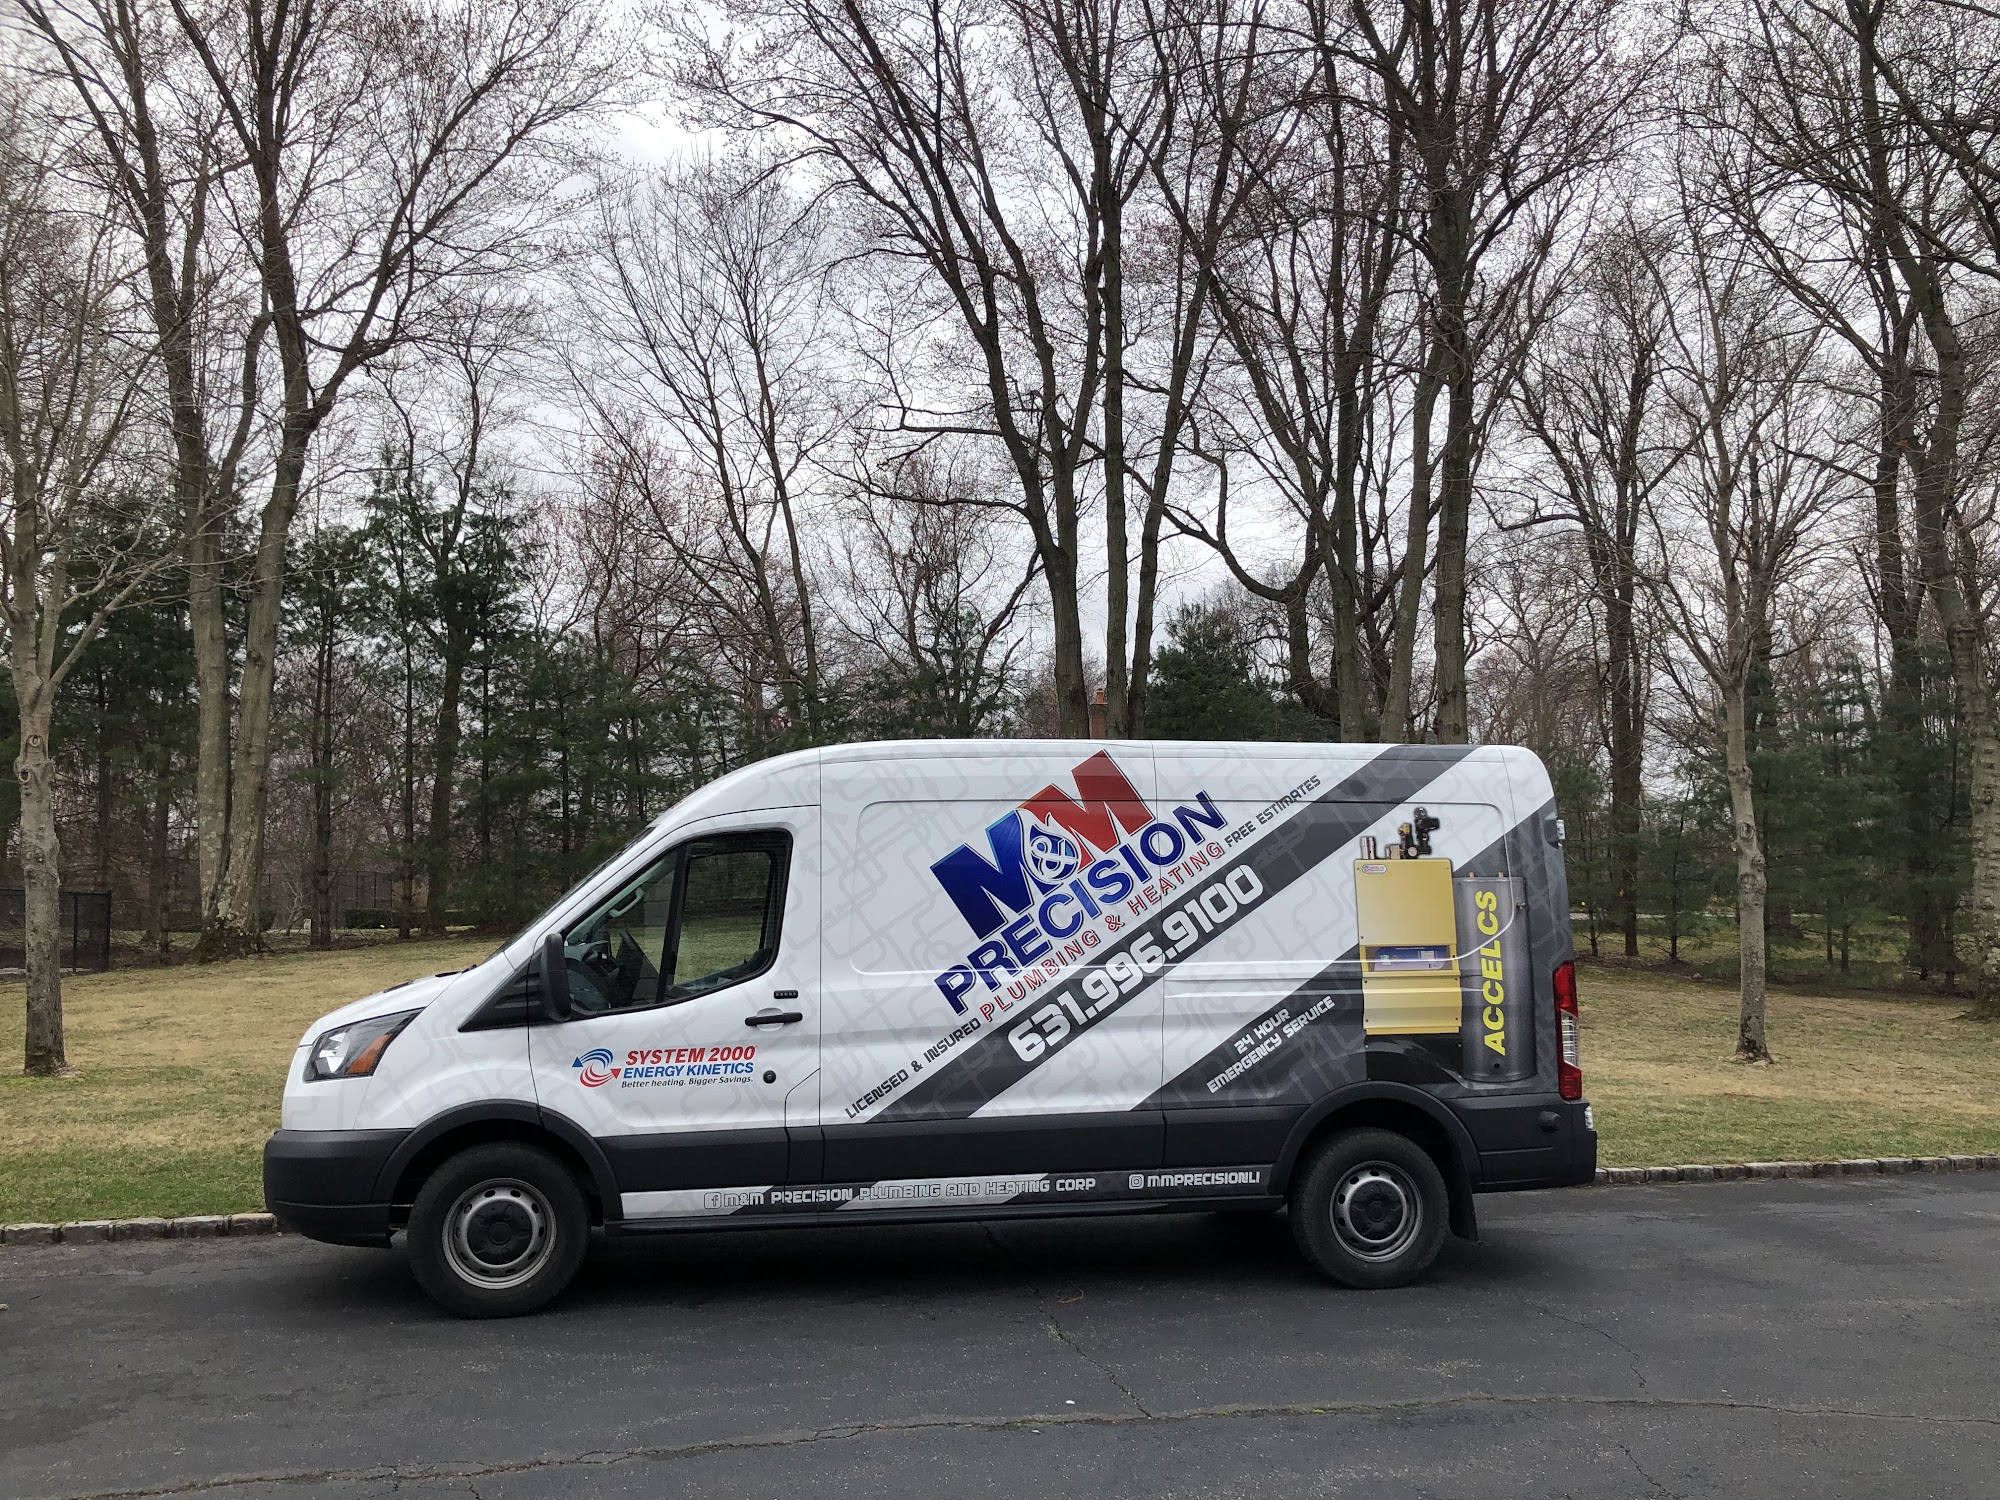 M&M Precision Plumbing And Heating Corp